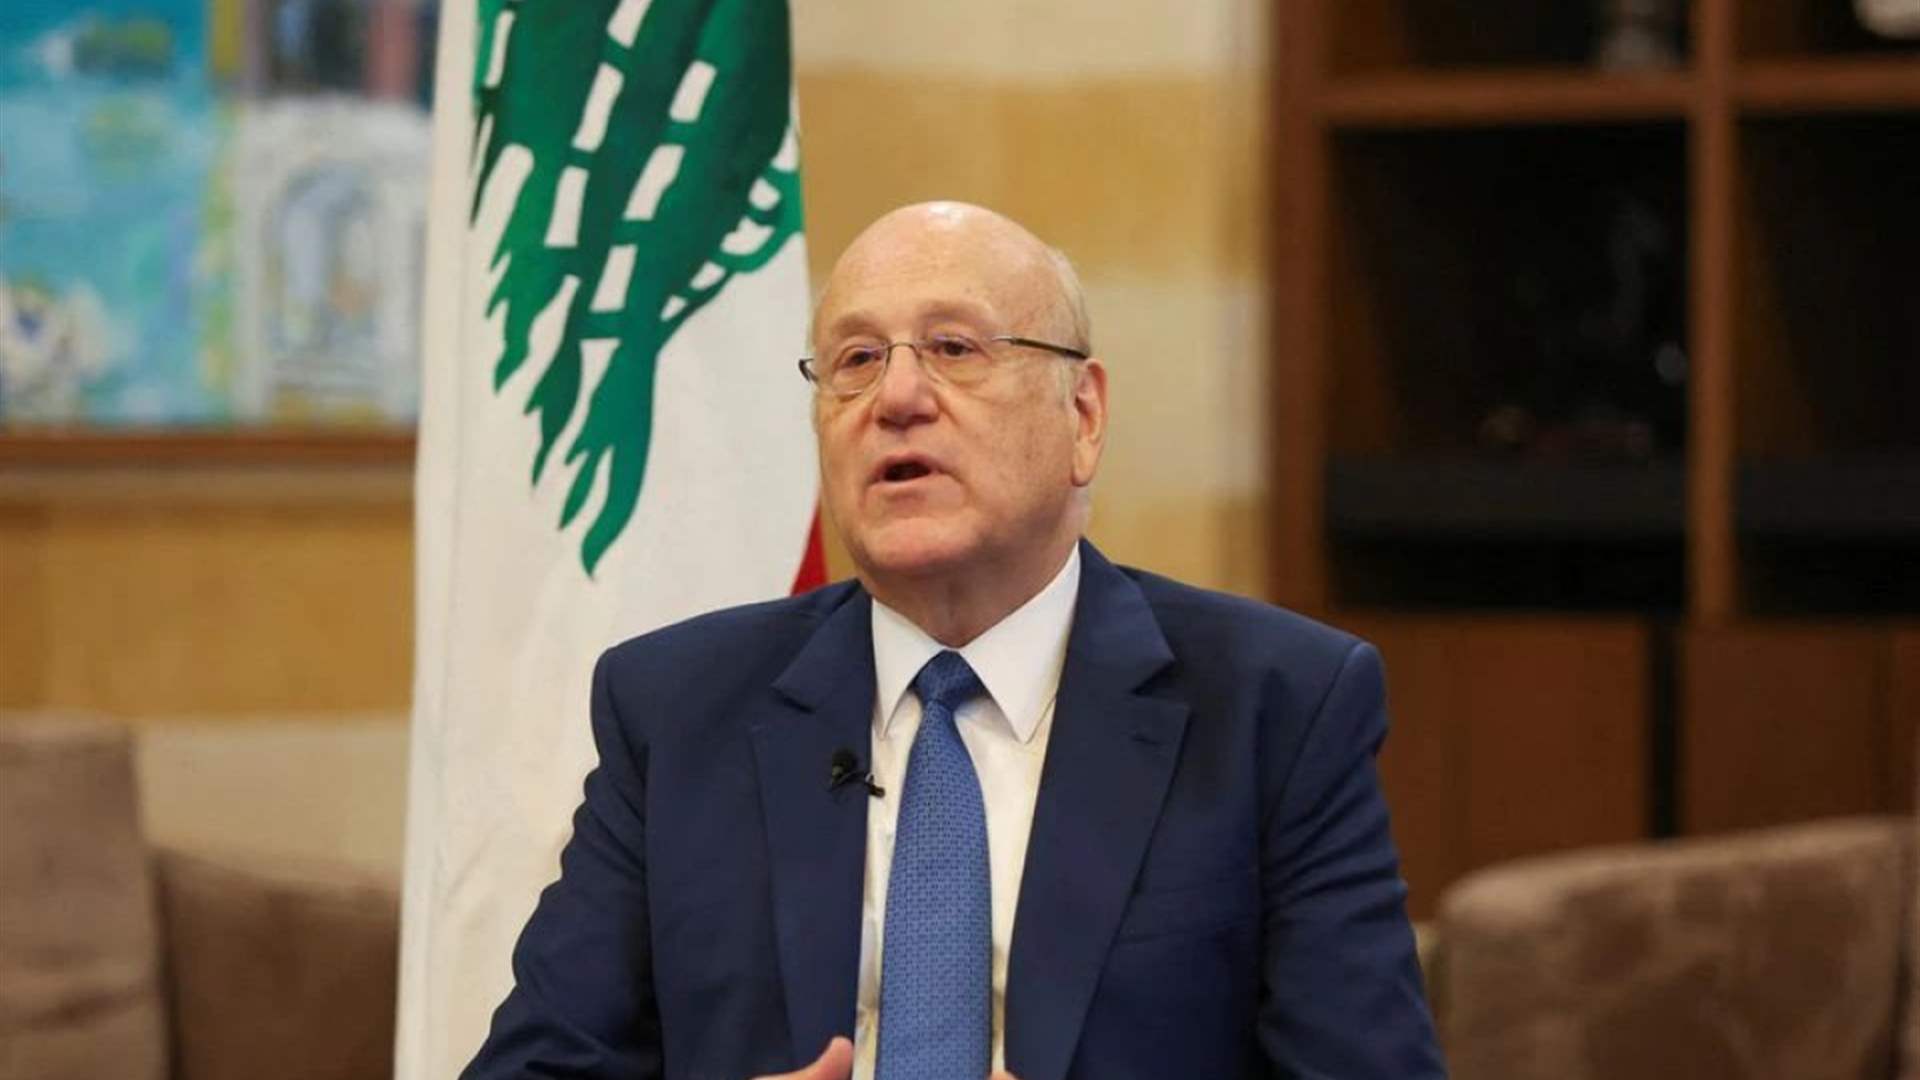 Mikati initiates financial measures: BDL audit reports received, forensic report pending, and draft law for borrowing funds in progress